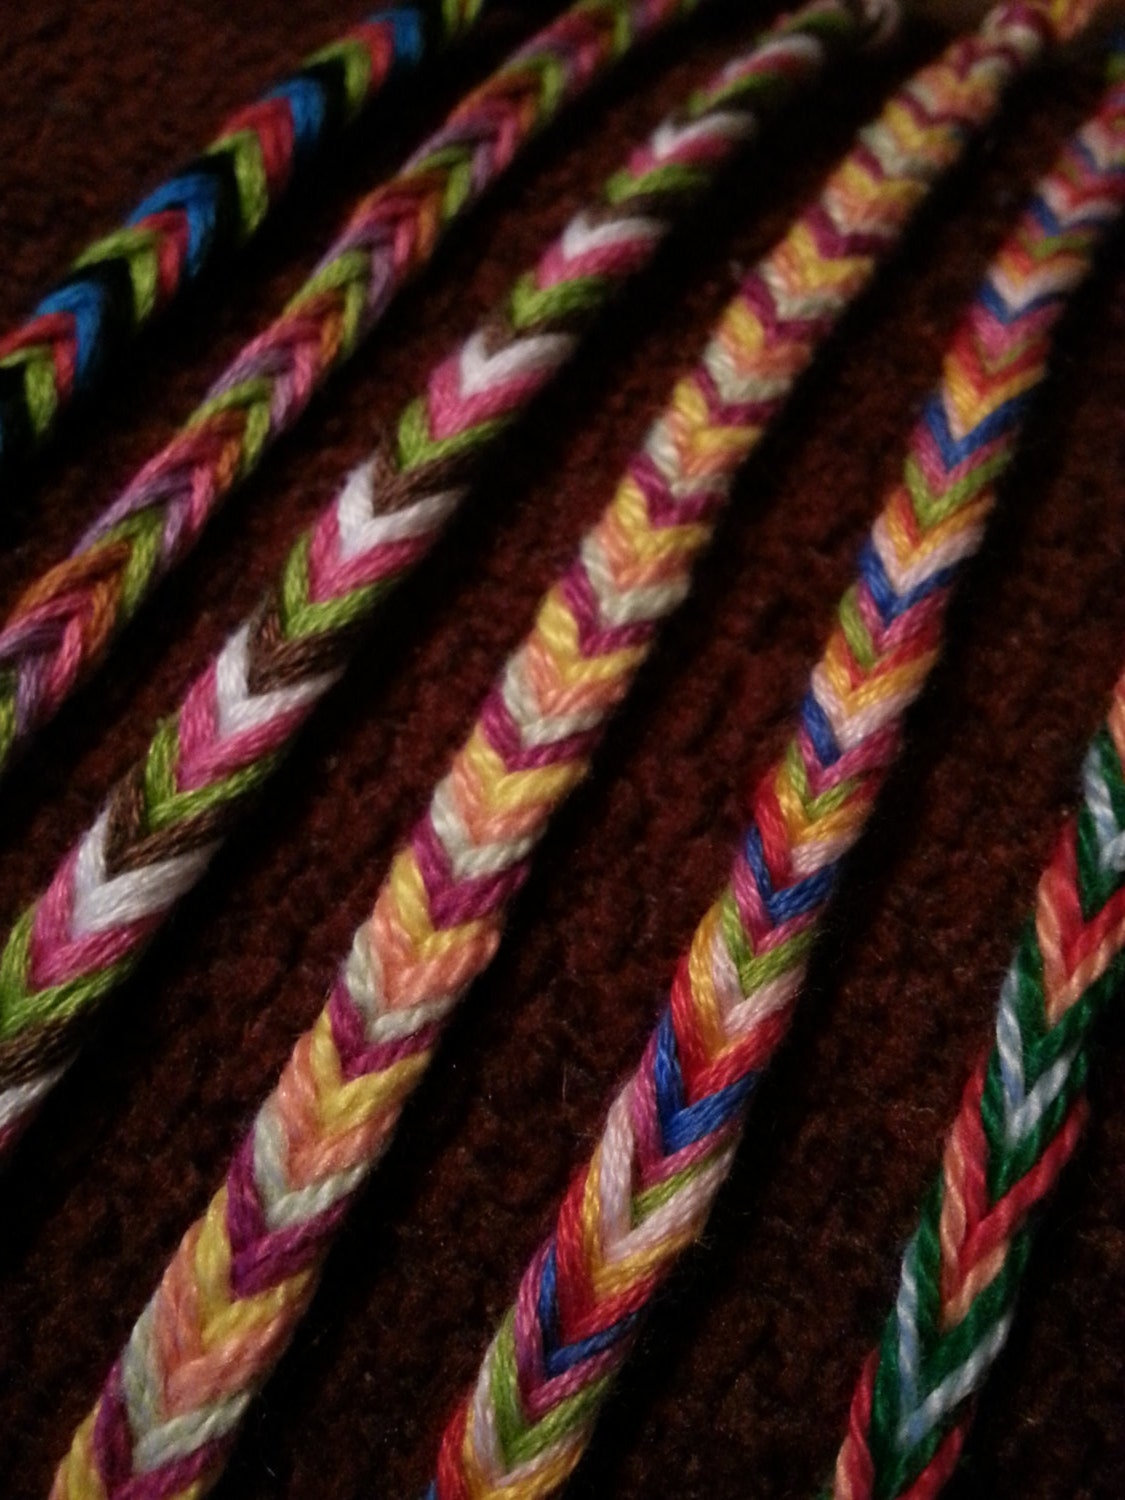 Embroidery Floss 6 Strands Friendship Bracelet String Cross Stitch Cotton  Thread 24, 36, 50 or 100 Colours 